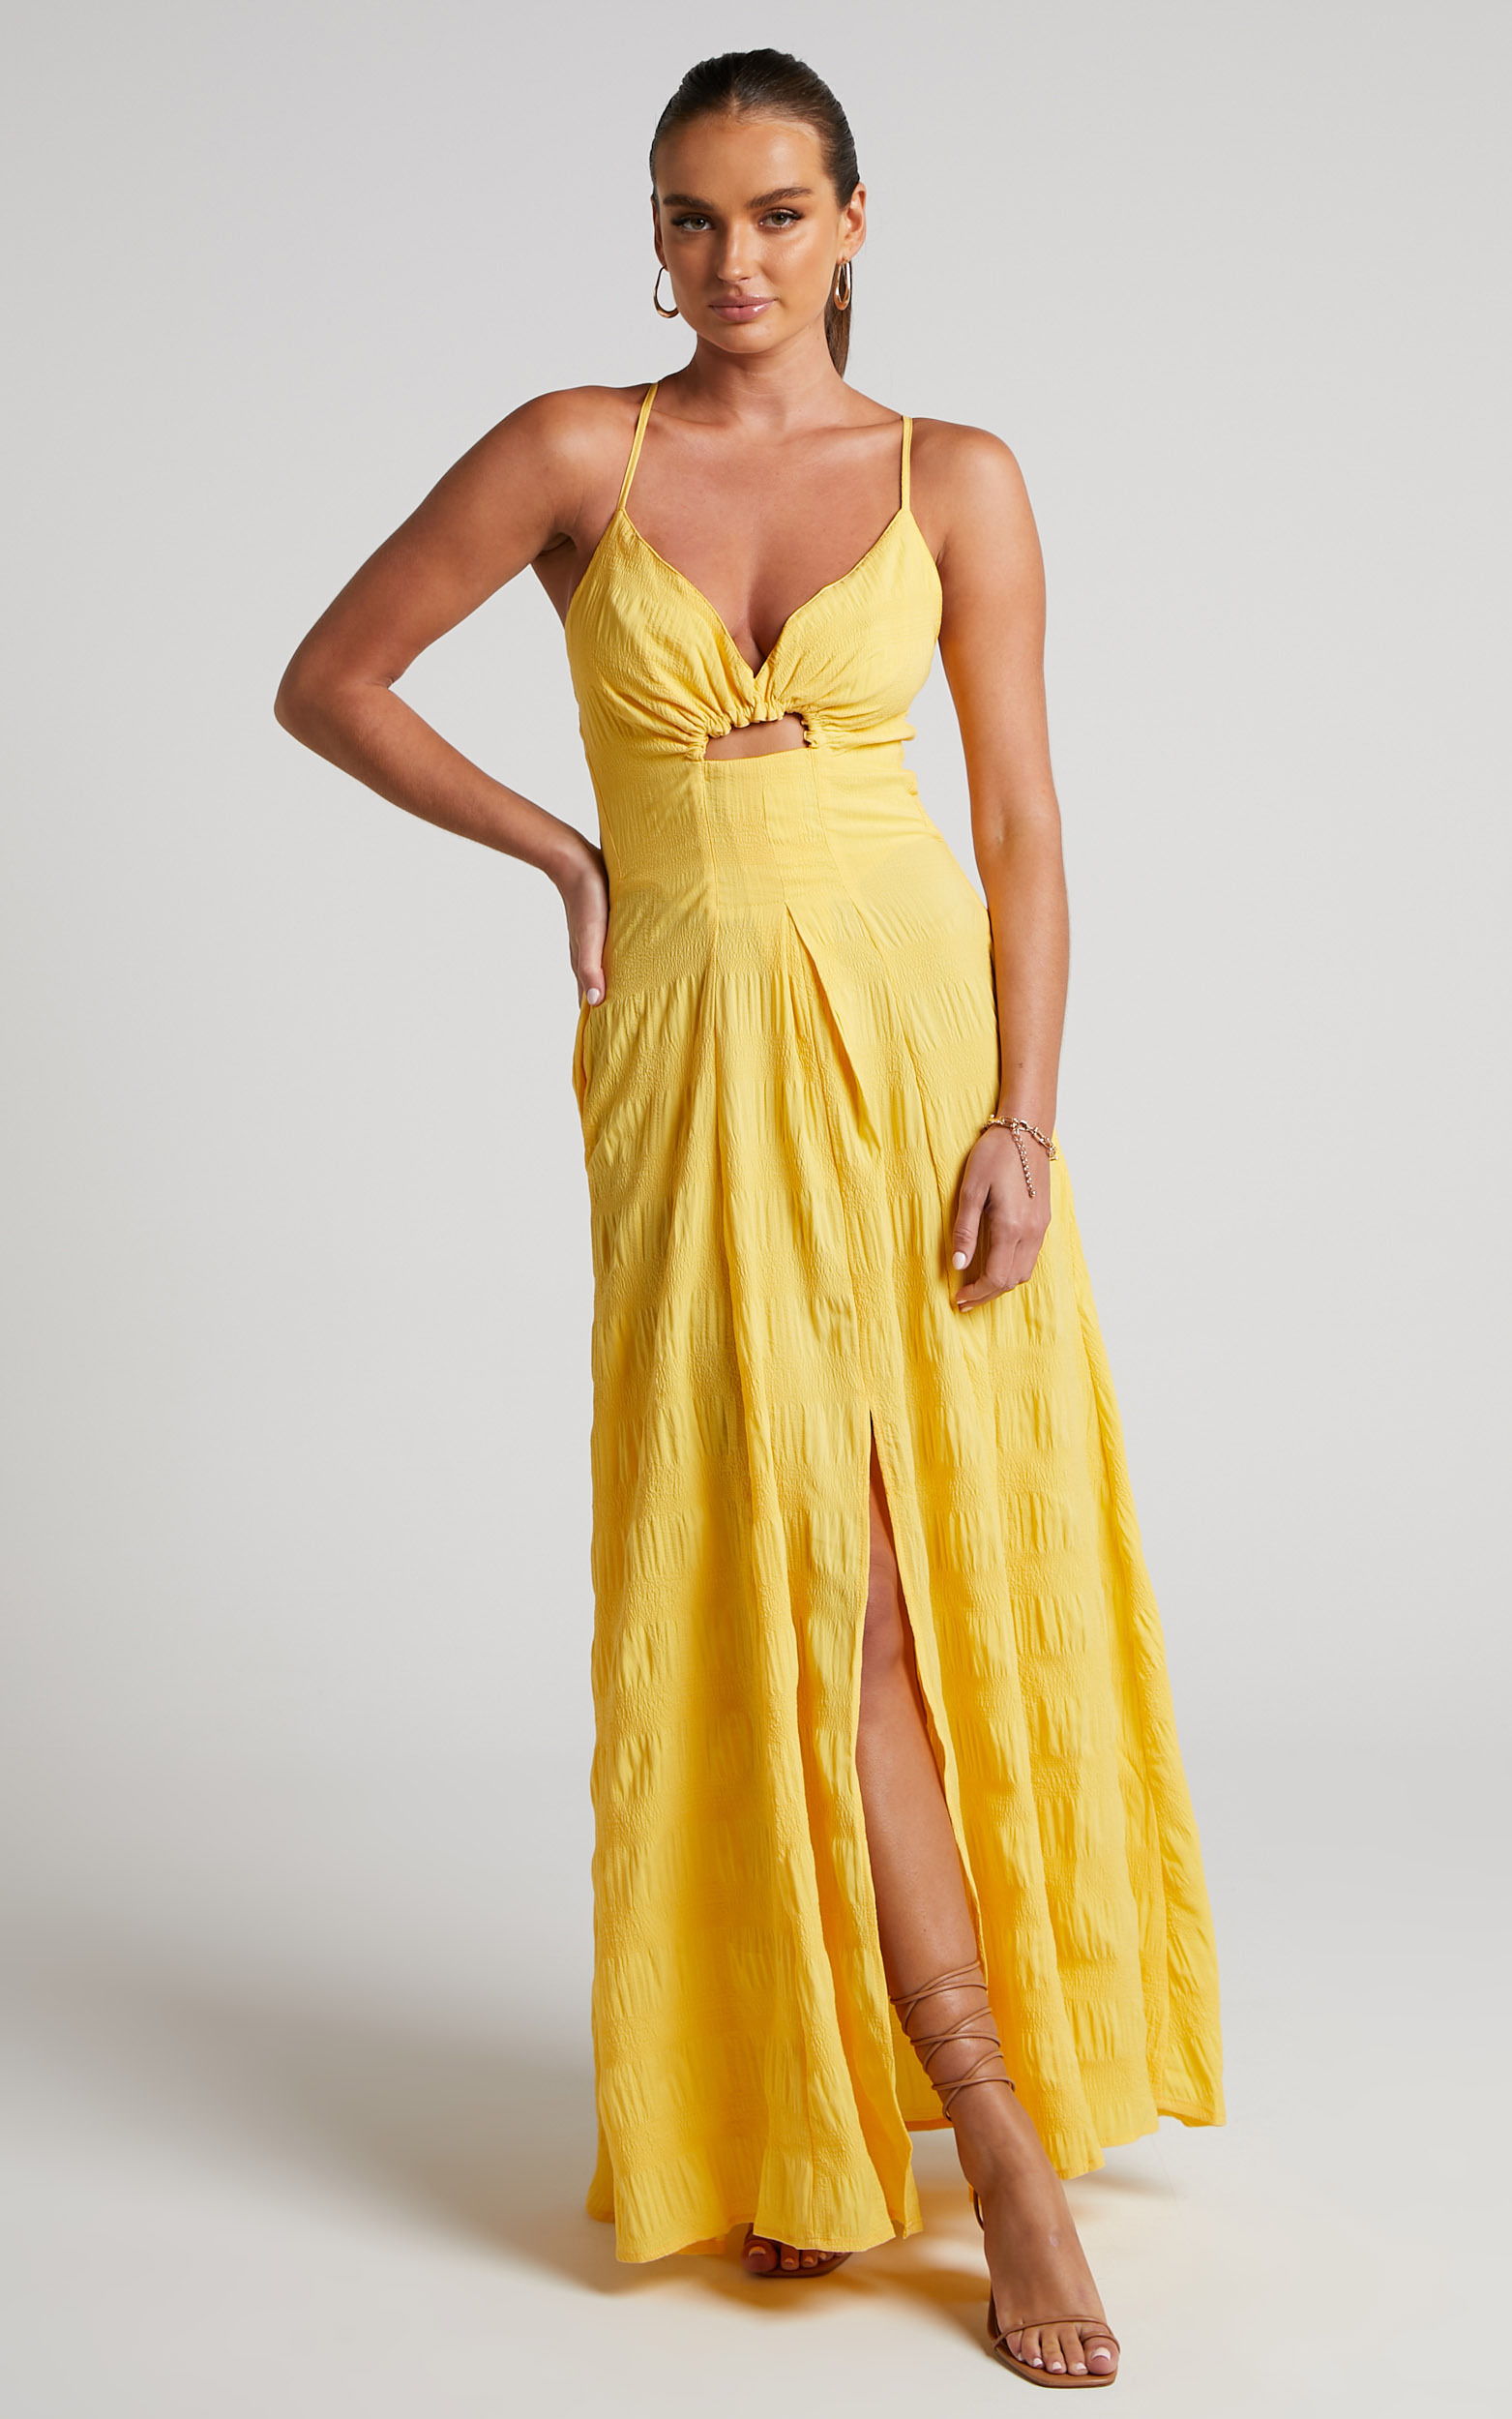 Marisse Maxi Dress - Cut Out Front Split Cross Back Textured Dress in Yellow - 06, YEL1, hi-res image number null